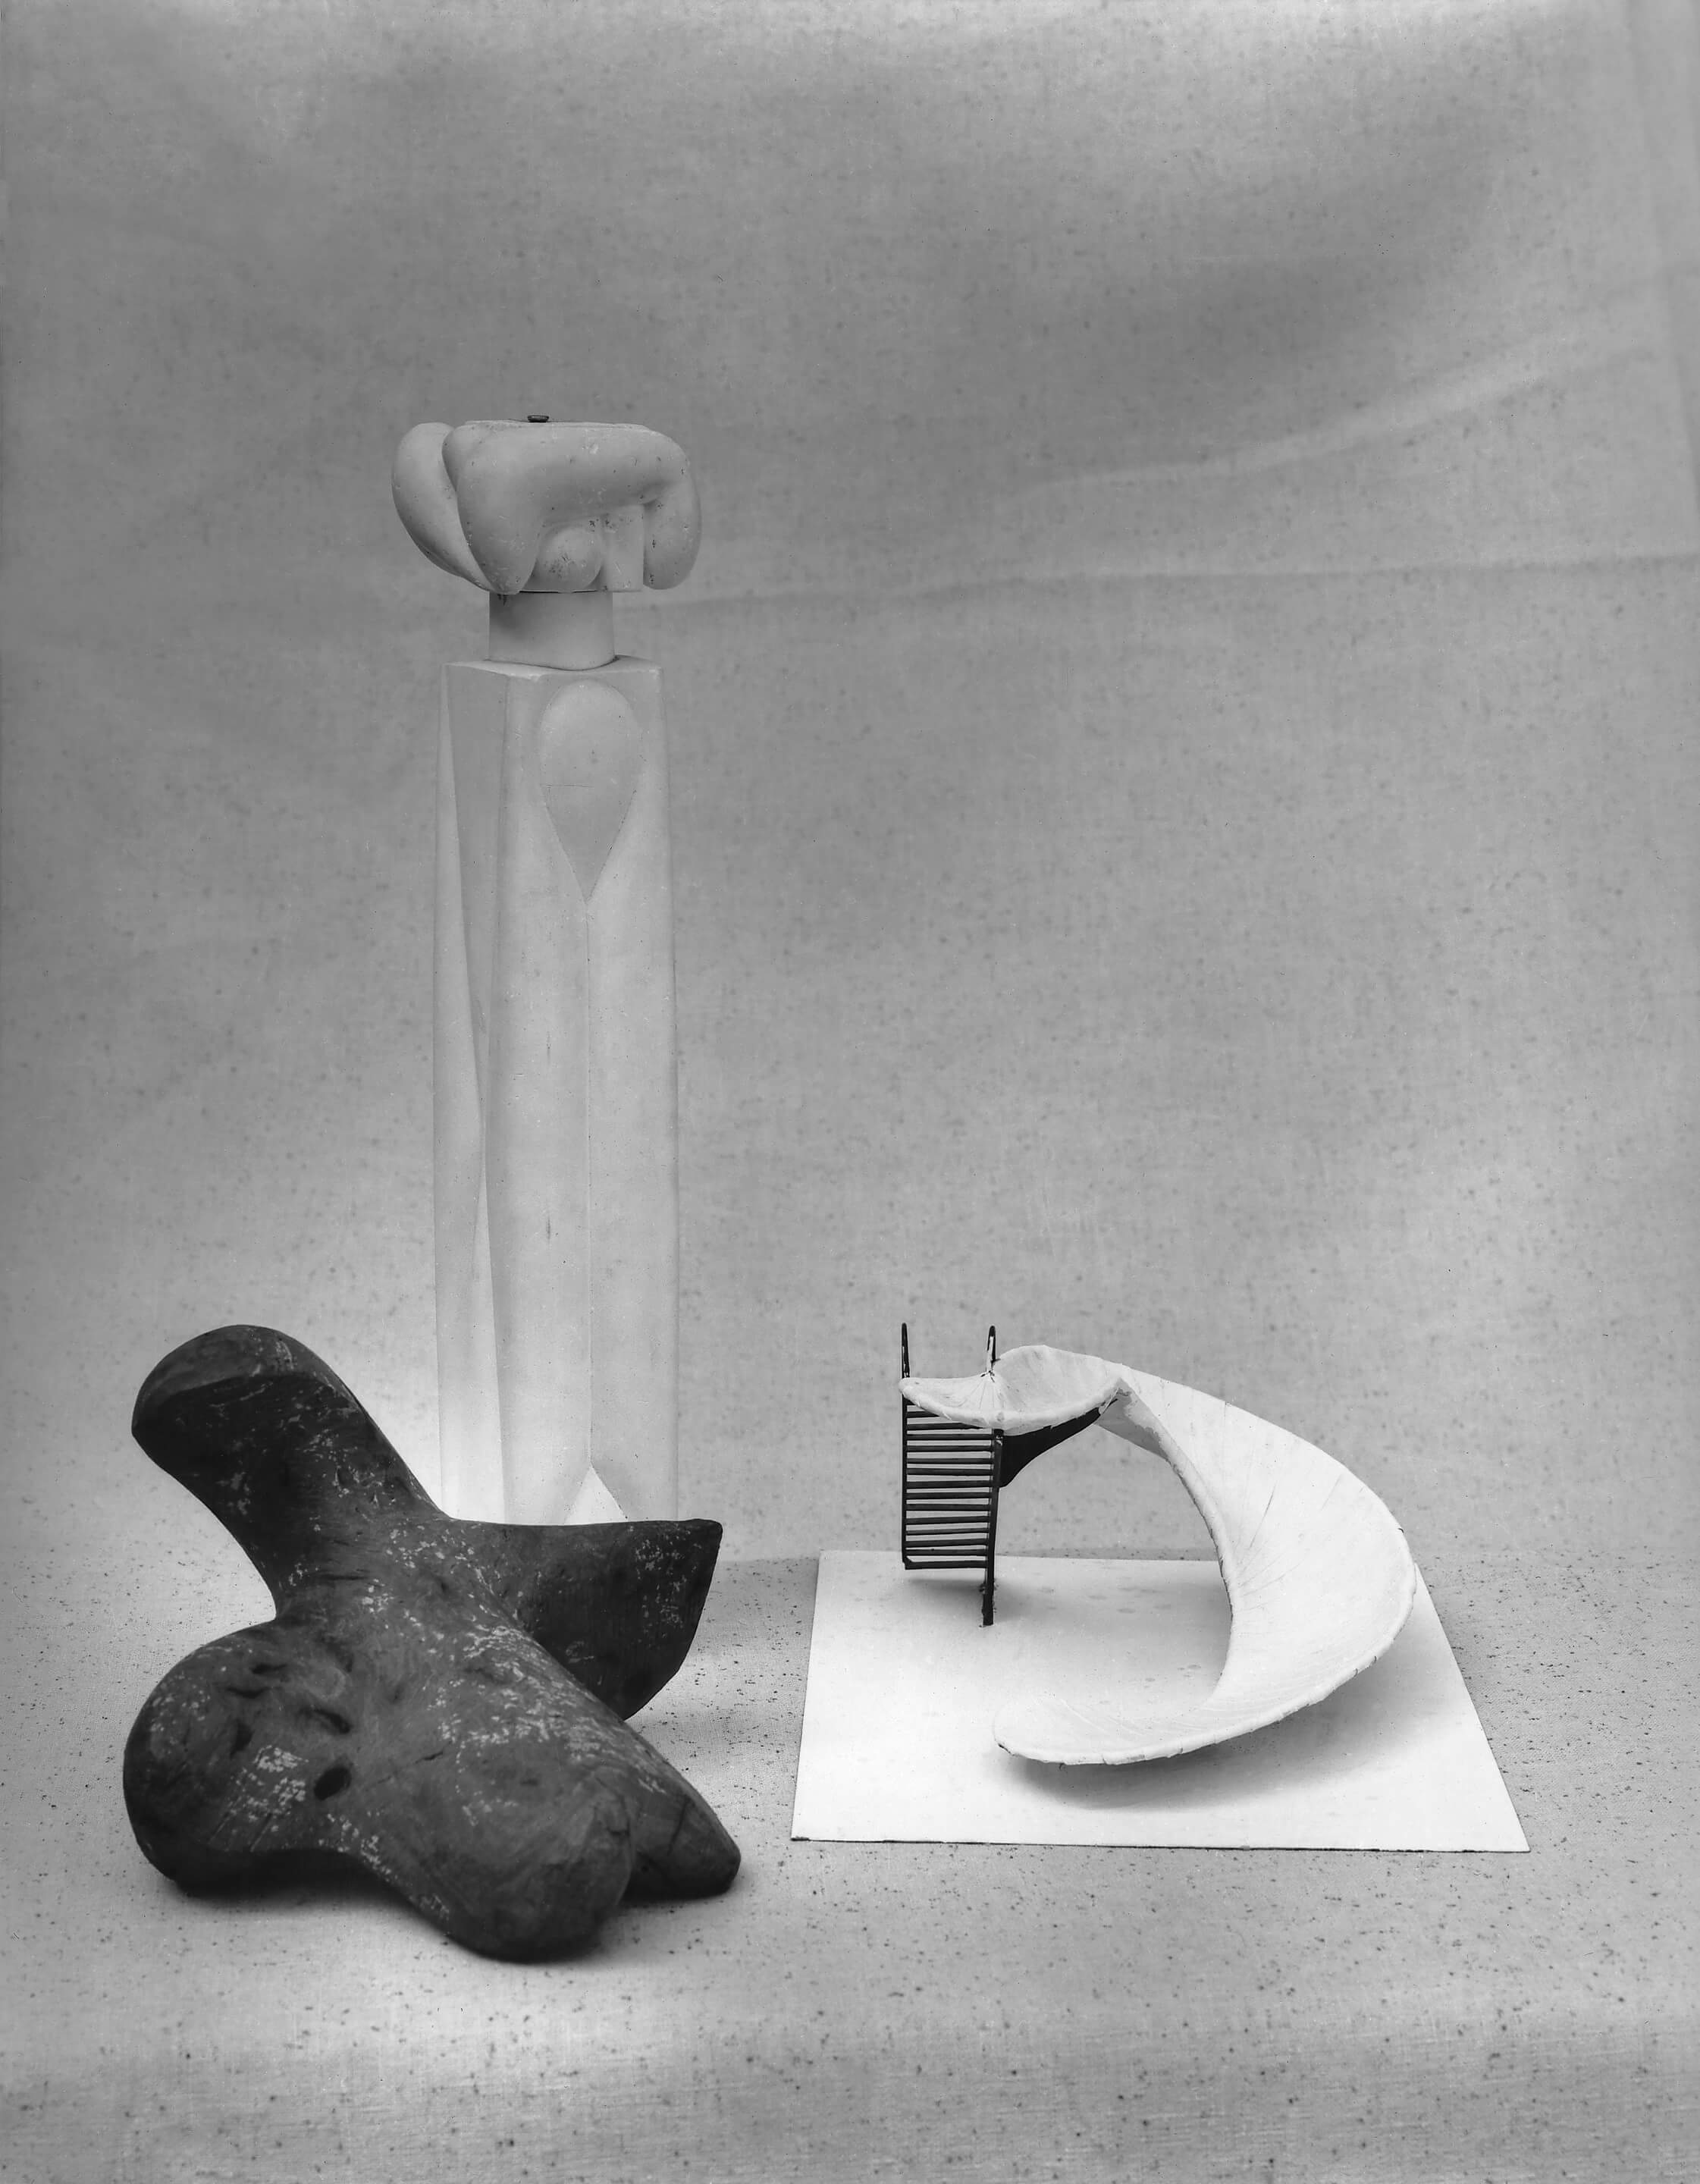 A collection of sculptural maquettes in a black and white photo